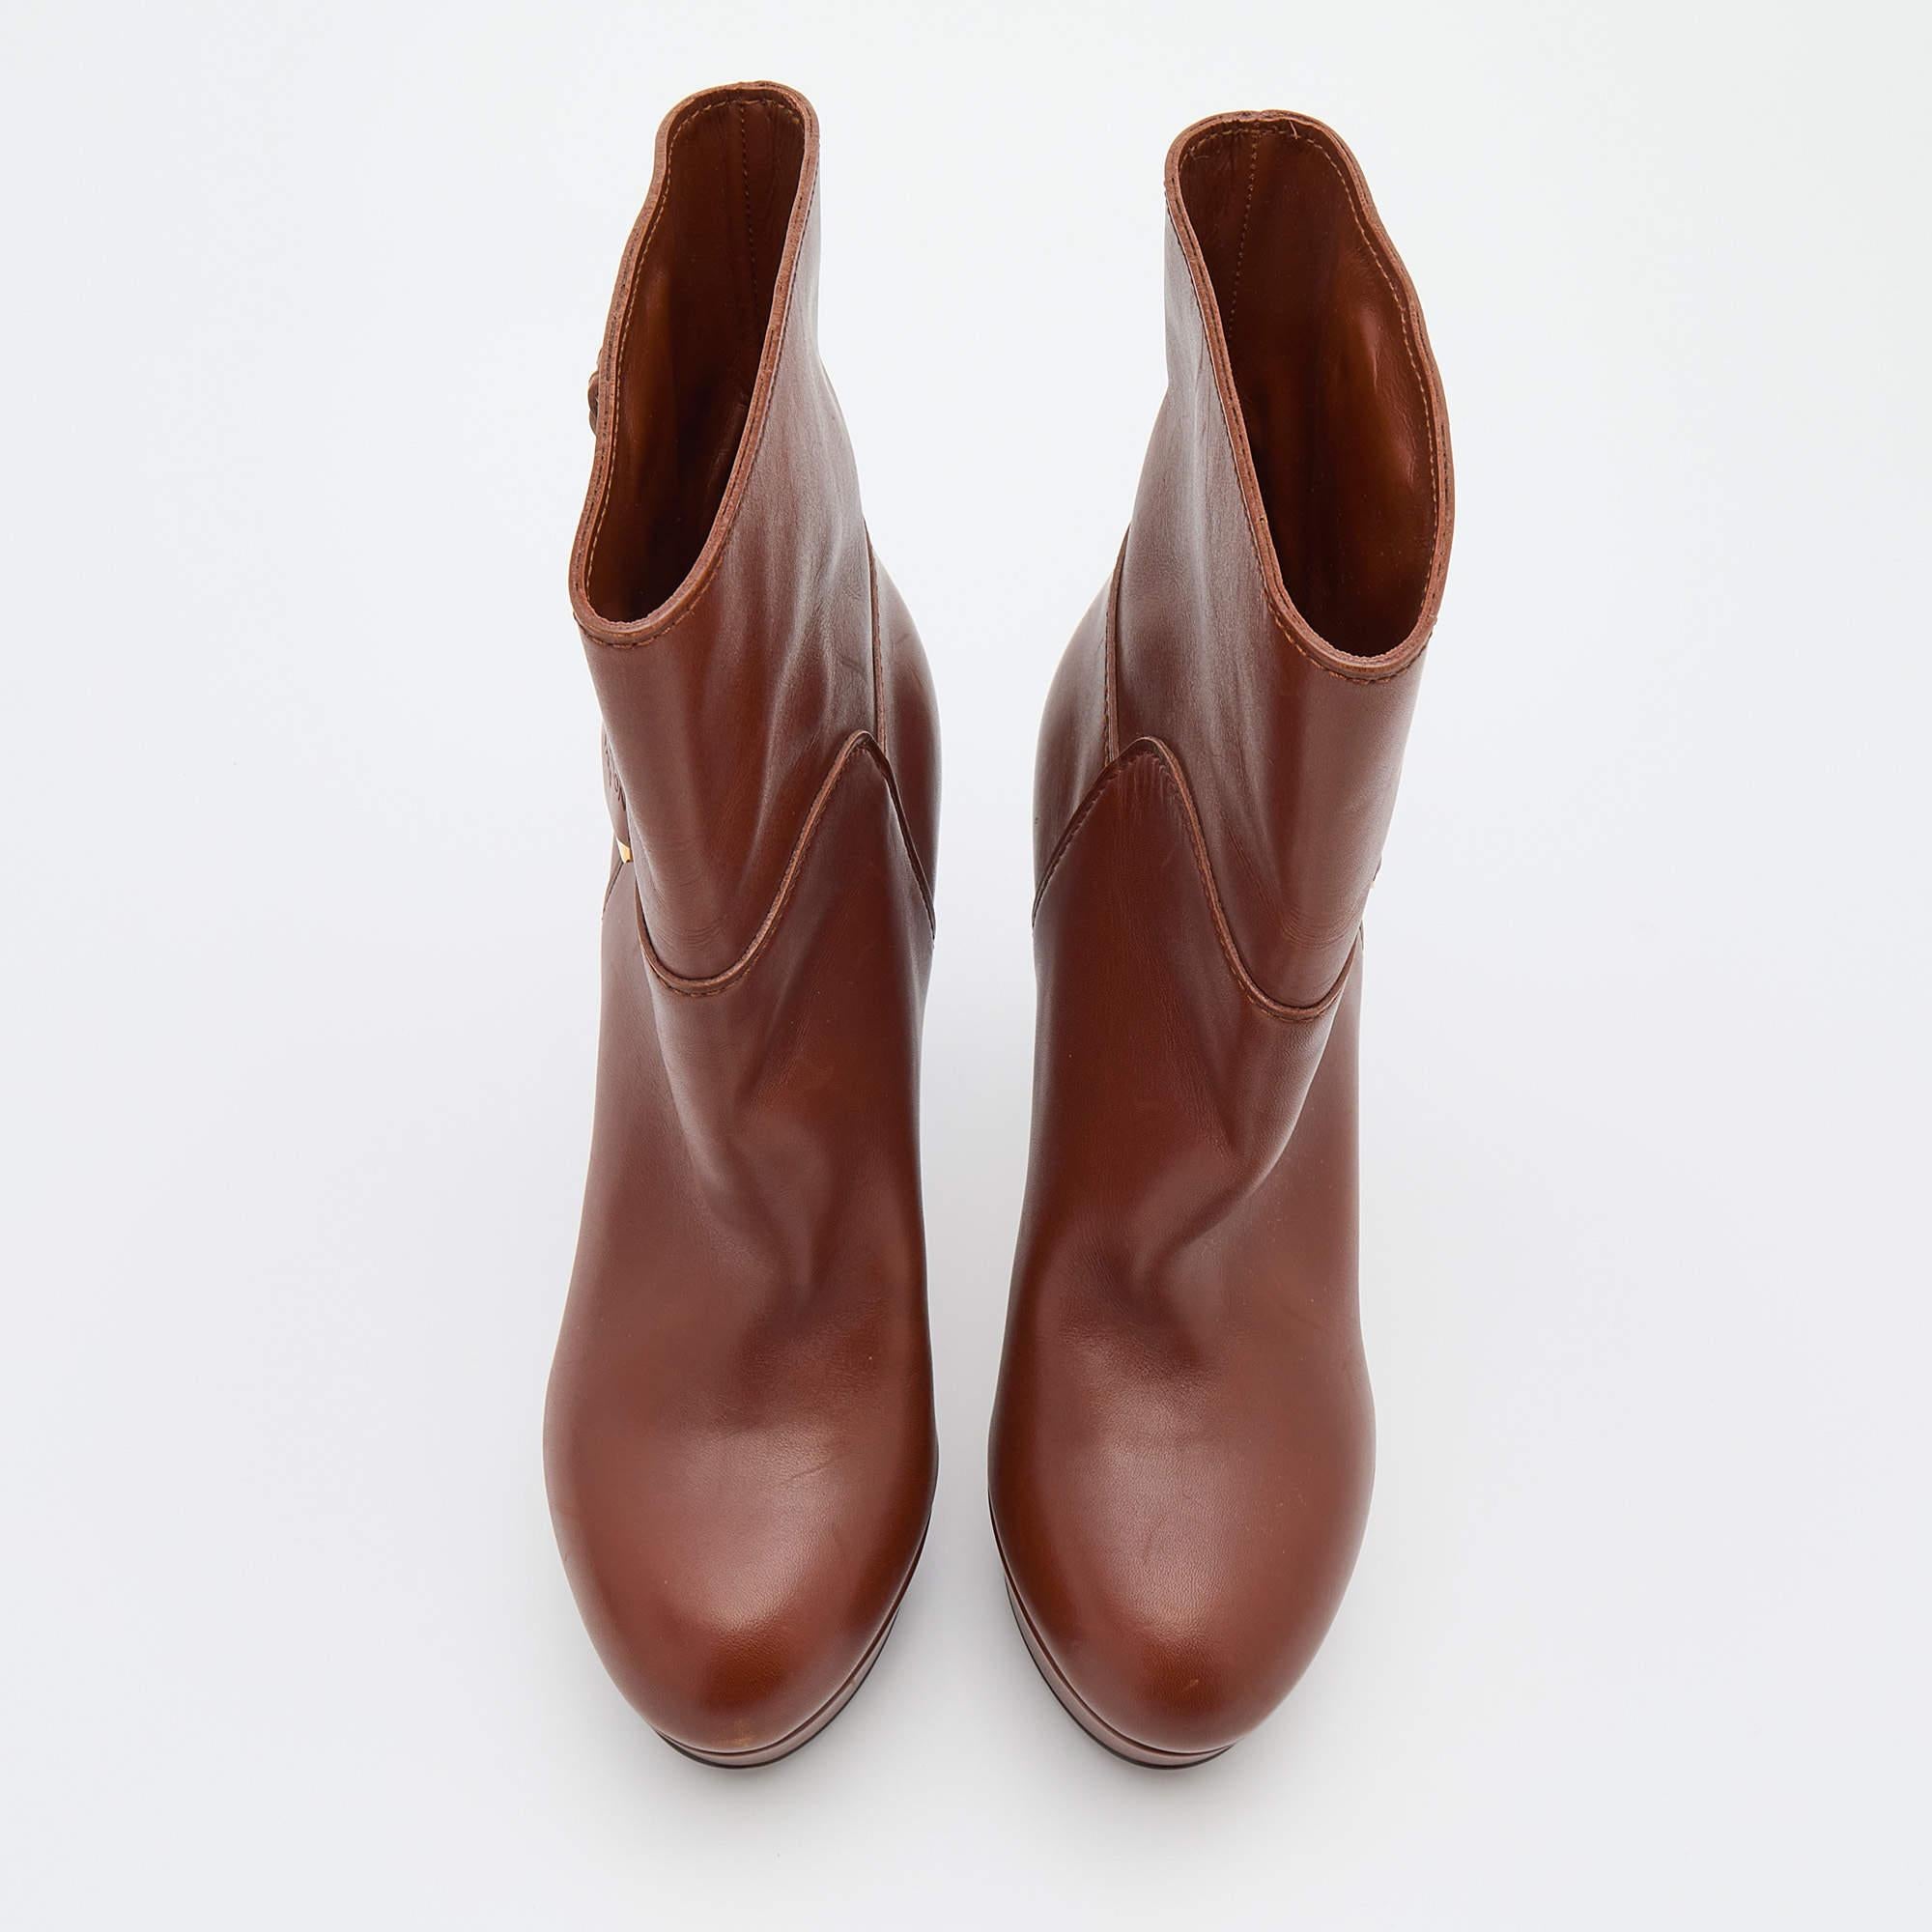 Louis Vuitton is all set to impress you with this stunning pair of boots. Crafted from leather, they feature sturdy heels. This pair of boots will raise your style factor.

